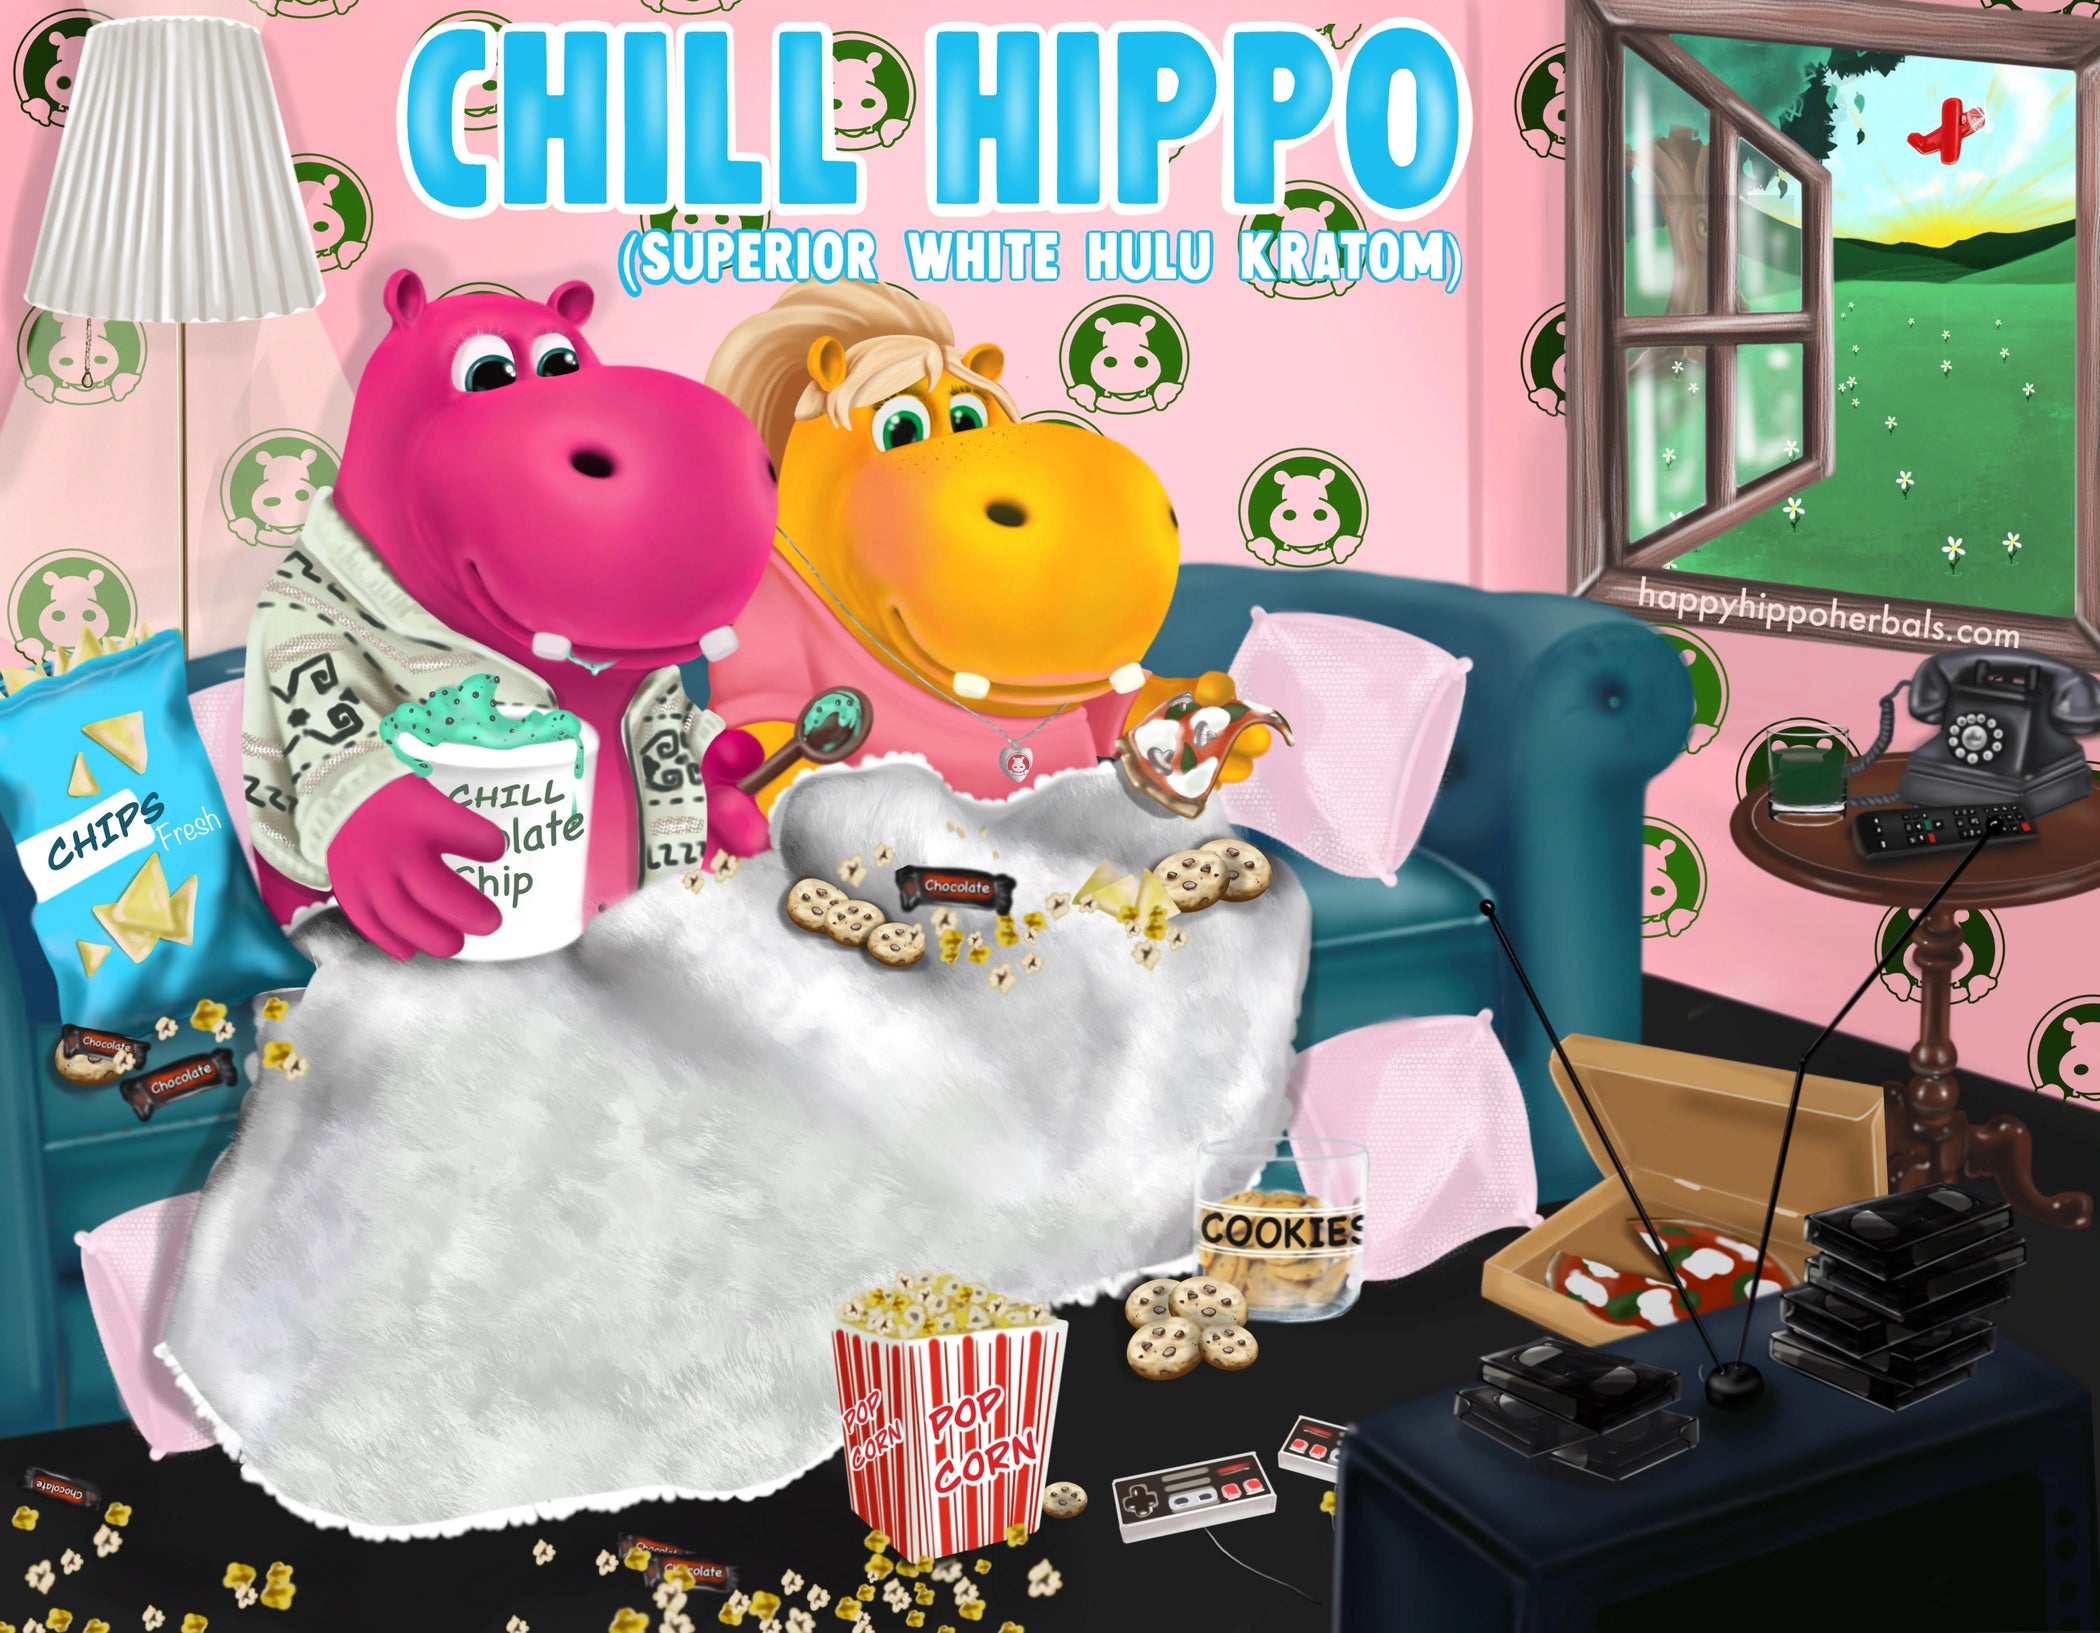 Graphic designed image depicting Puddles the Hippo sitting on the sofa watching netflix with a lady friend and sipping kratom tea made from White Hulu Kratom Powder (Chill Hippo)